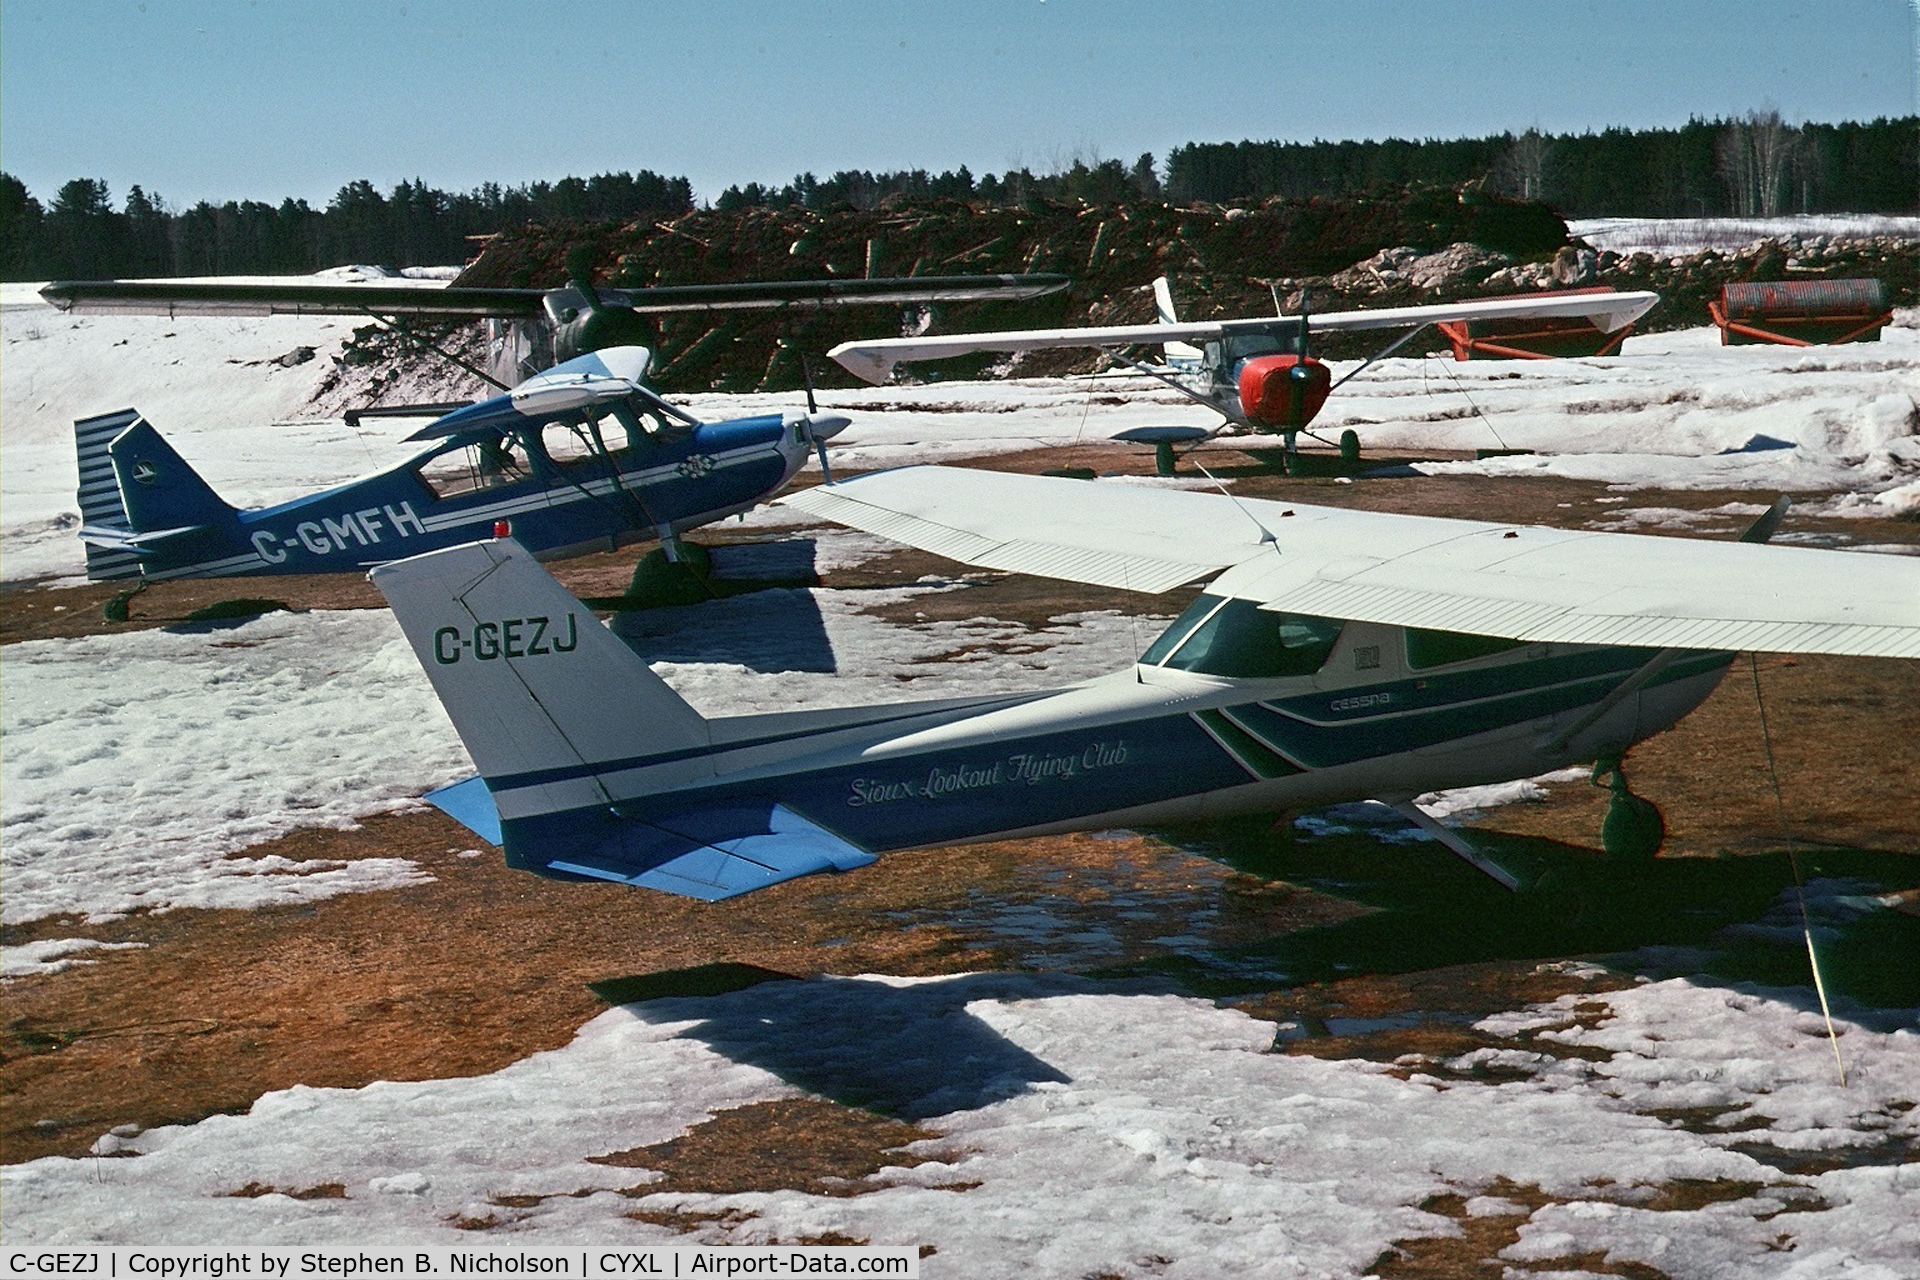 C-GEZJ, Cessna 150L C/N 15075708, Tied up at Sioux Lookout Flying Club's space at Sioux Lookout Airport, 1978